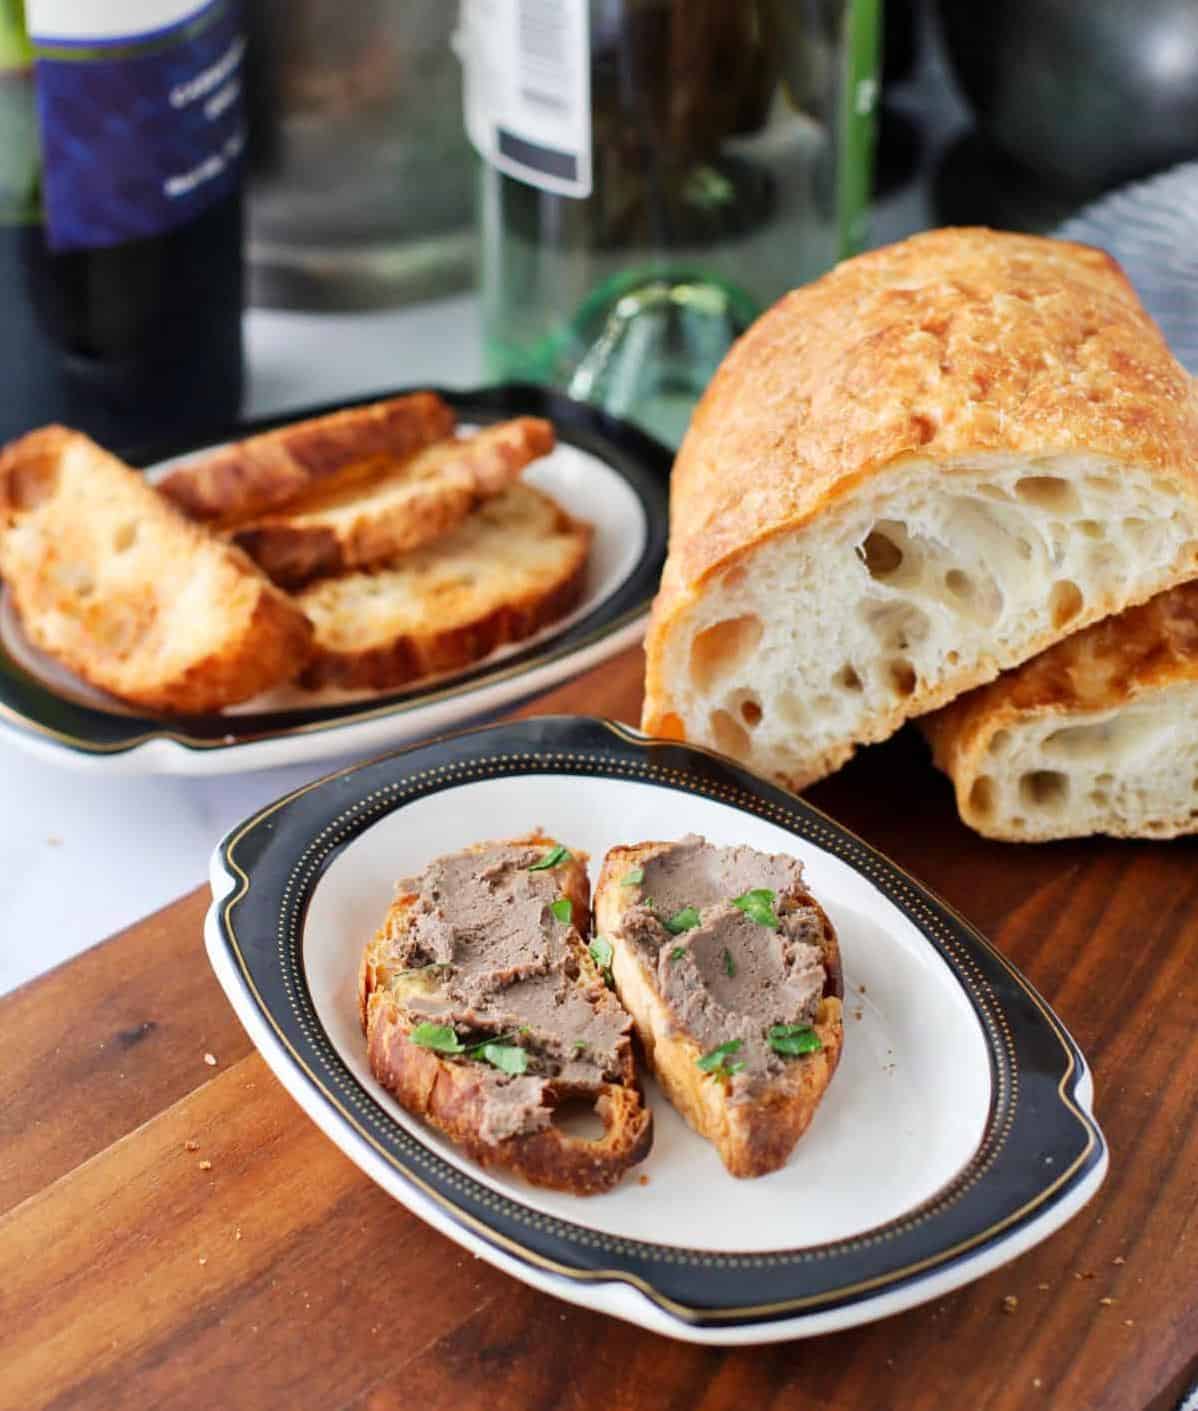  The perfect pairing of chicken liver and blue cheese